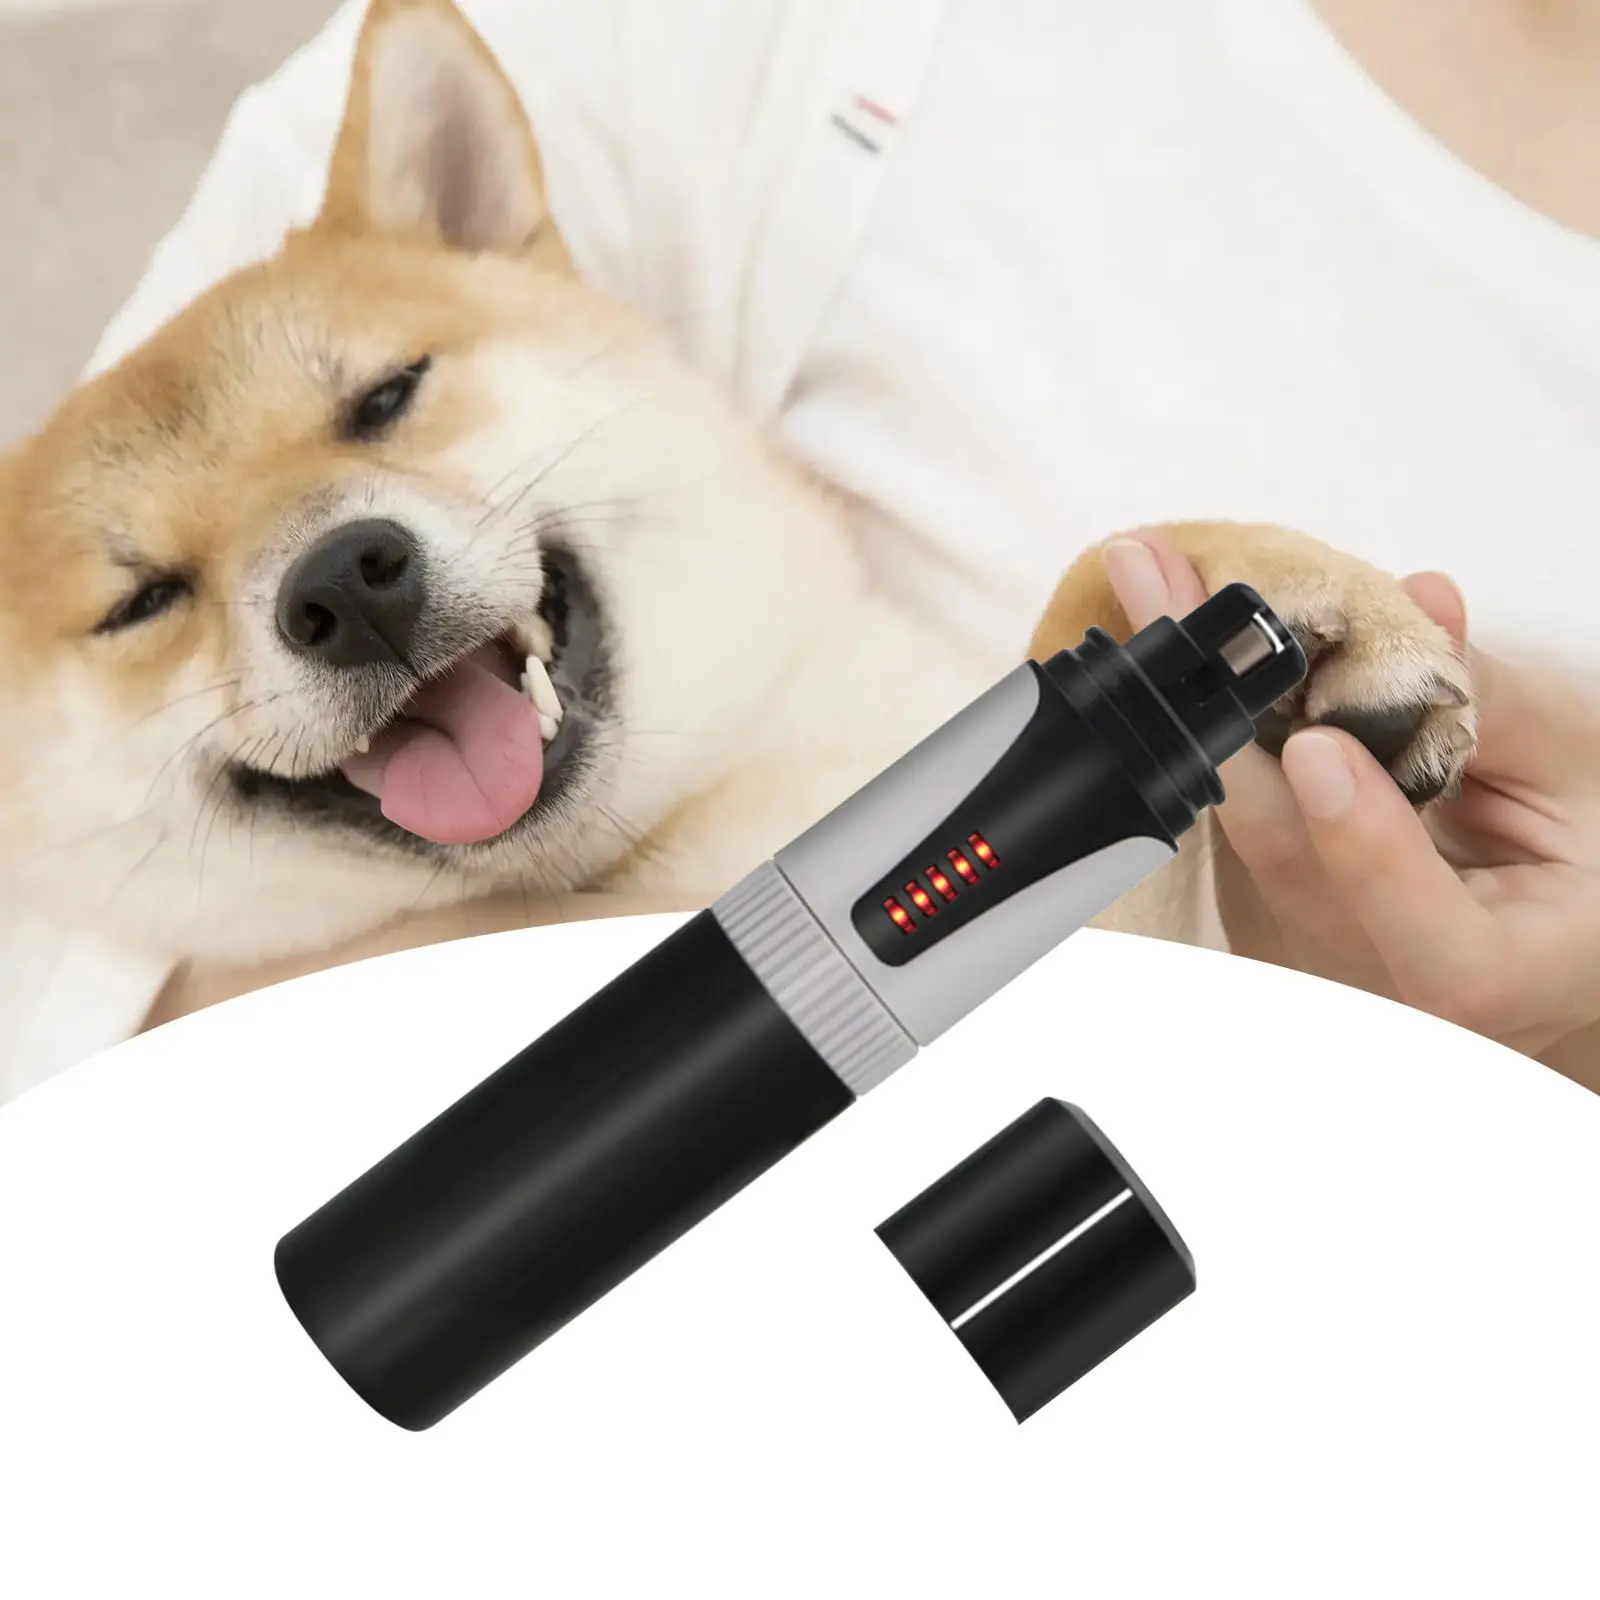 Pet Nail File Electric Dog Nail Grinding Tool Trimmer Tools Polisher Nail Clipper USB Rechargeable Painless Dog Cat Nail Grinder